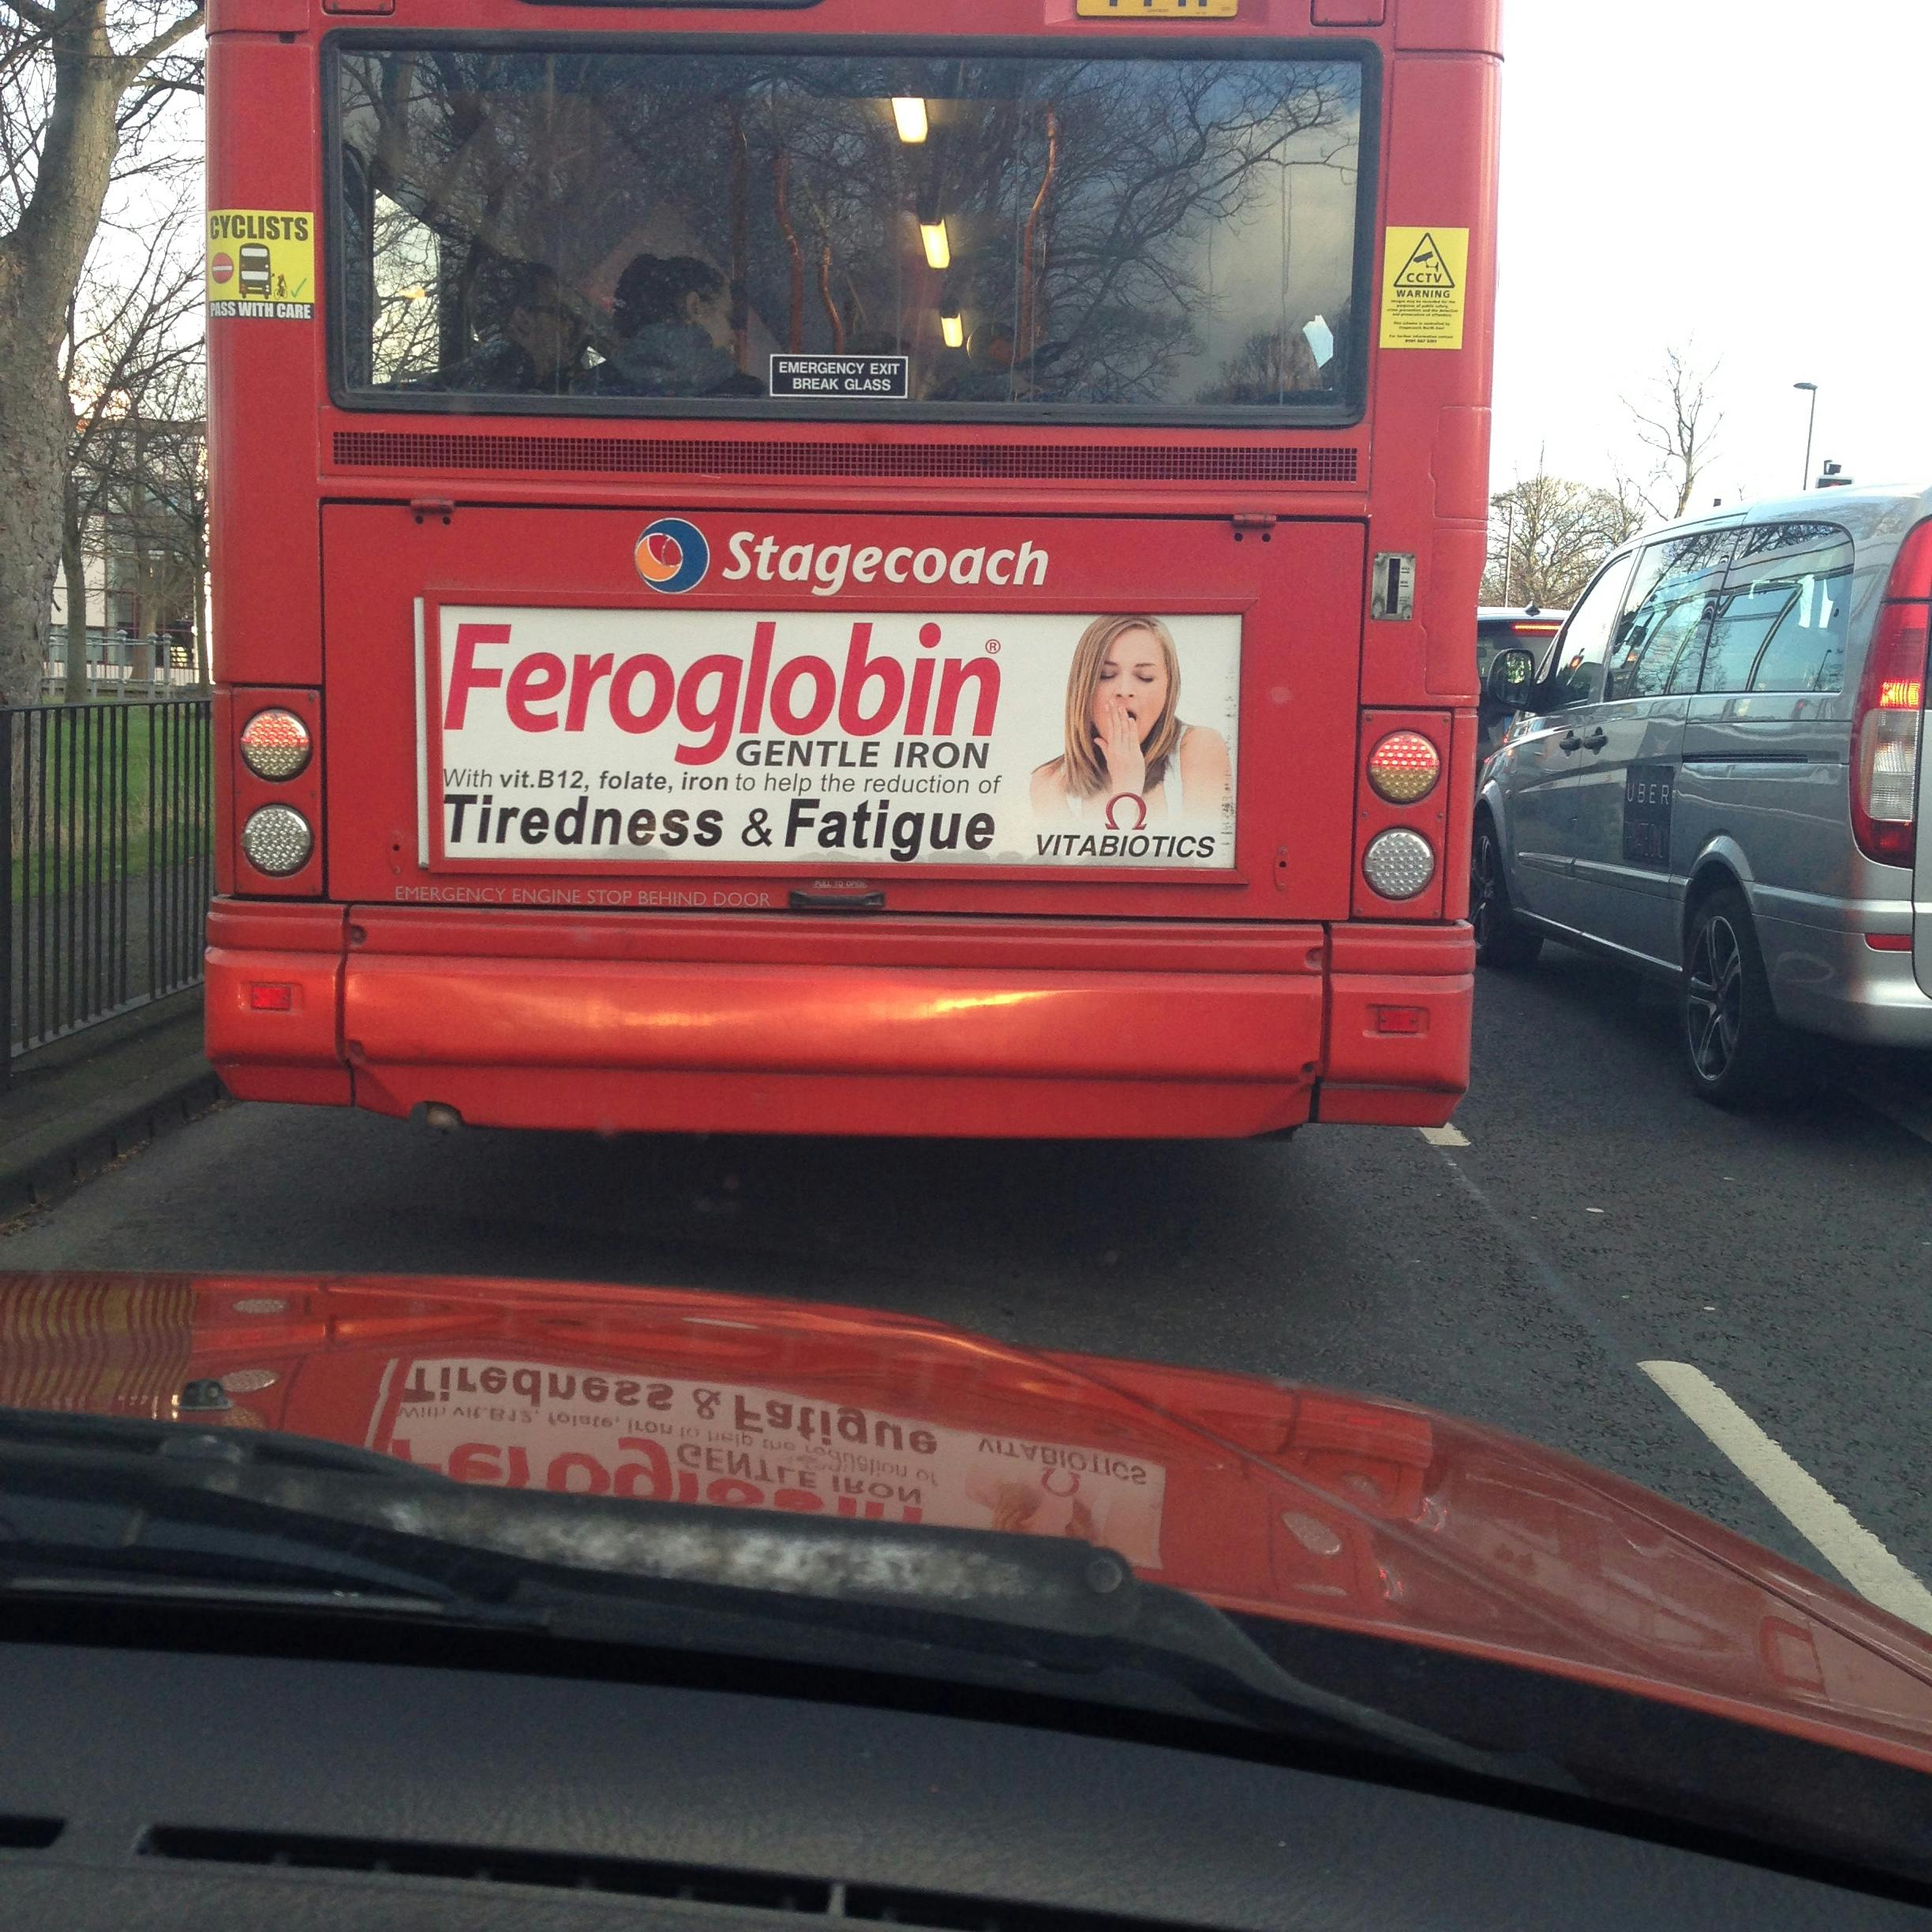 Free stock photo of bus, bus with advertising, red bus